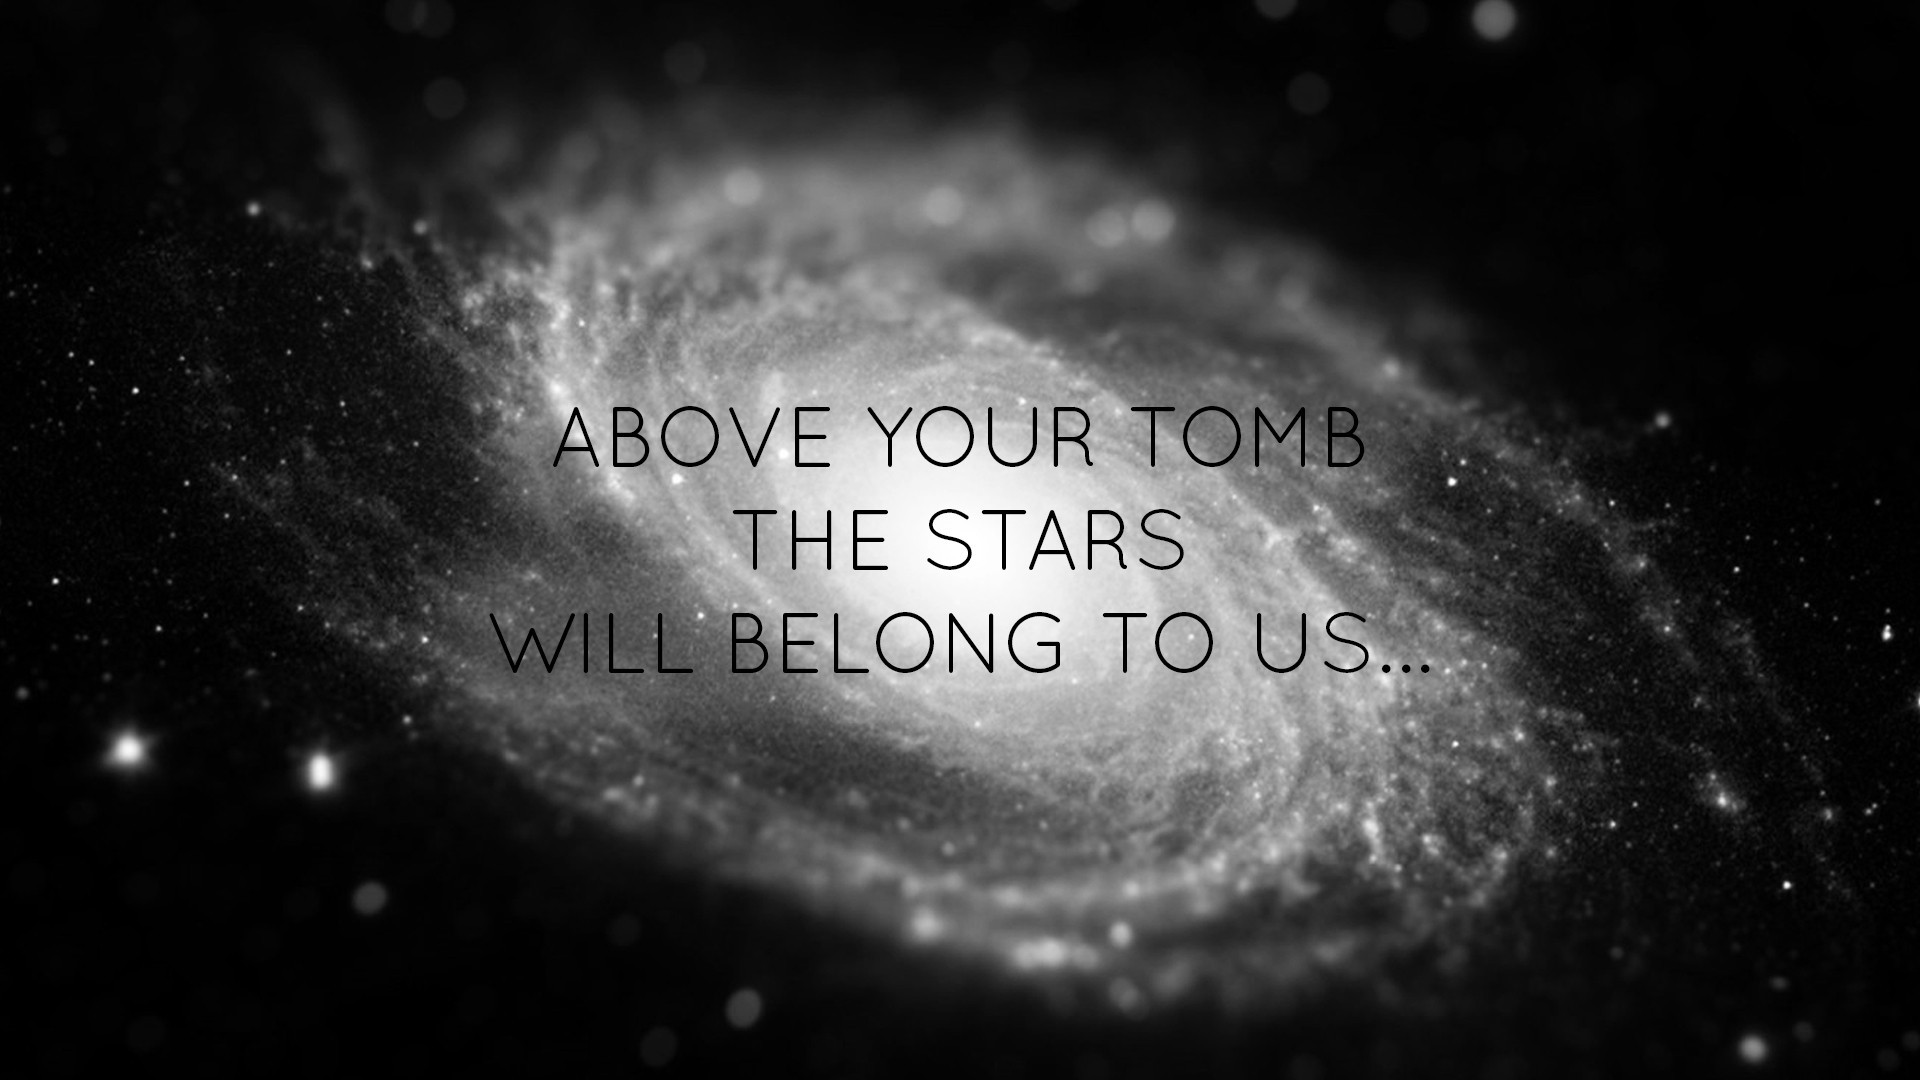 1920x1080, Motivational Wallpaper Quotes 27 115 Best - Above Your Tomb The Stars Will Belong - HD Wallpaper 